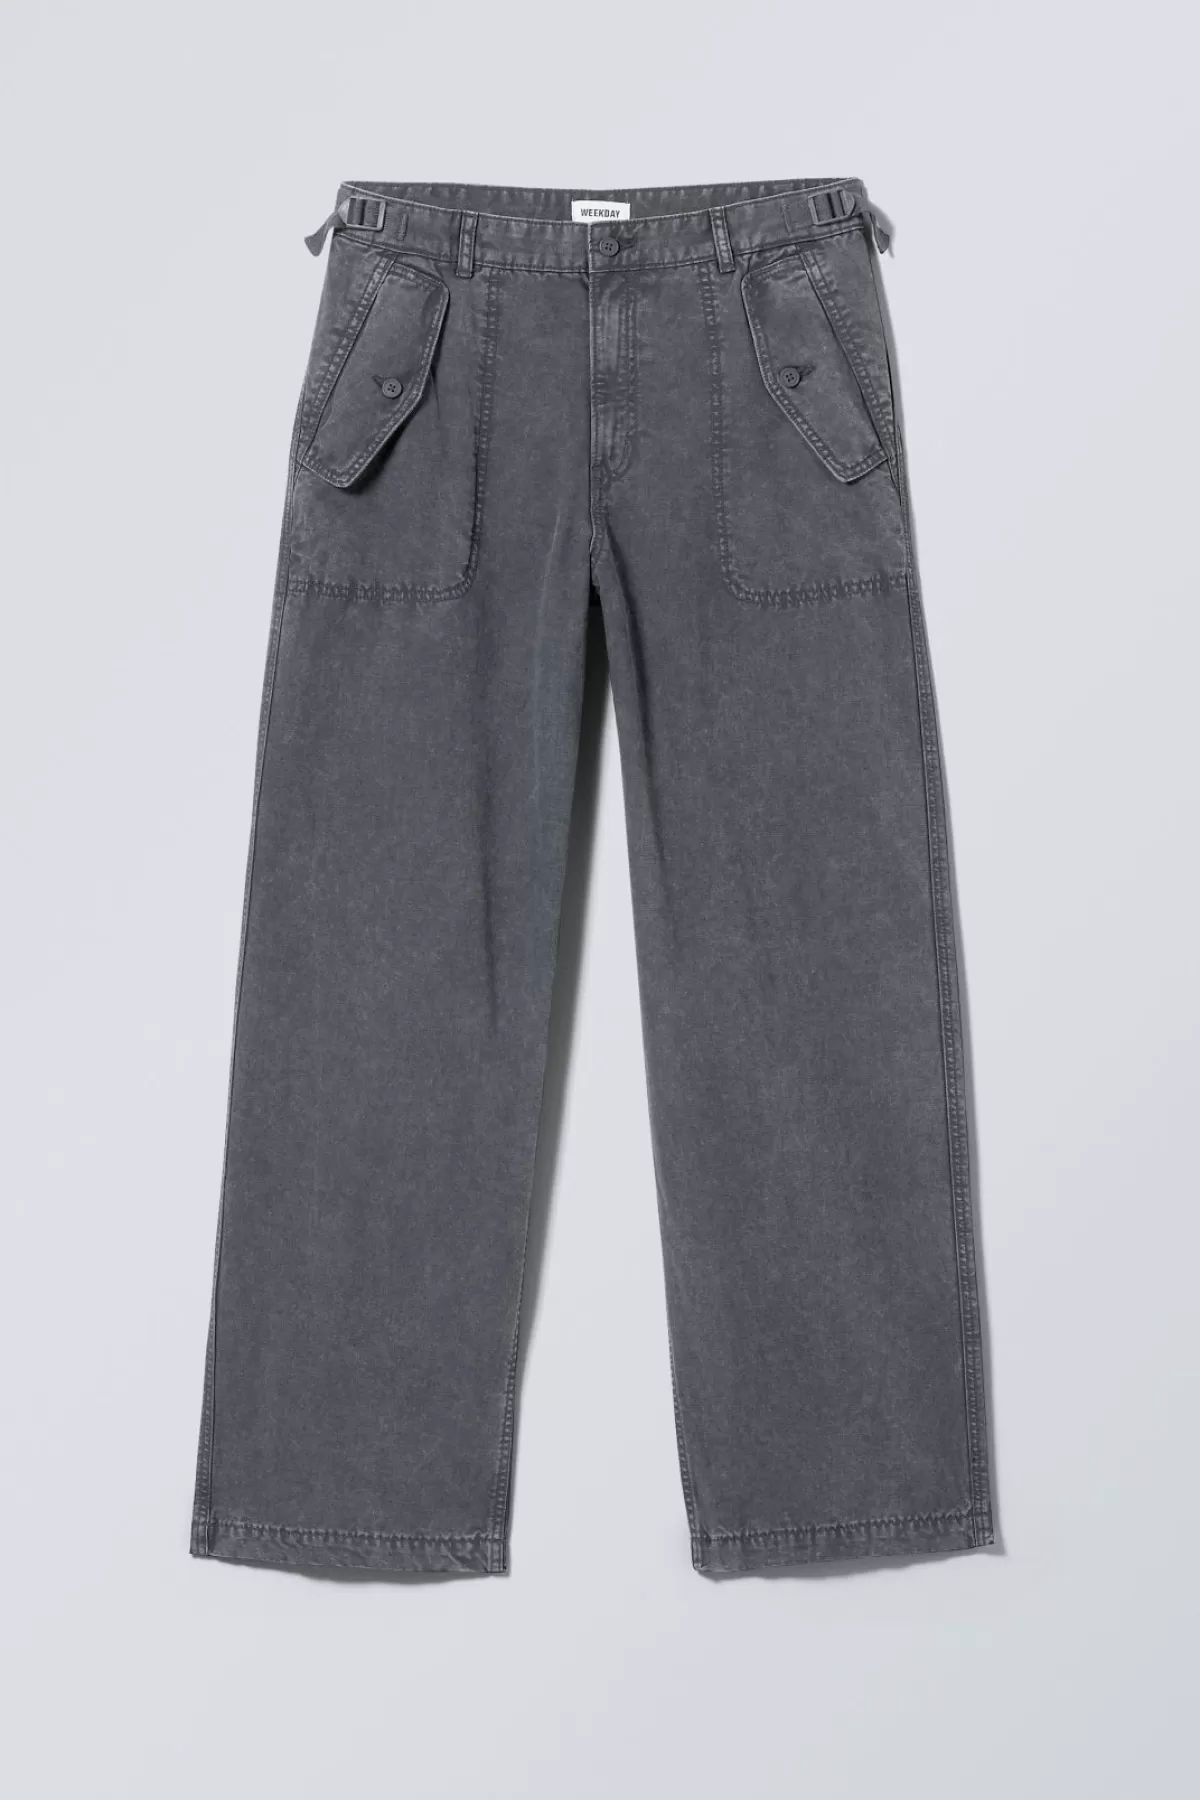 Weekday Frej Relaxed Workwear Trousers Washed Grey Flash Sale